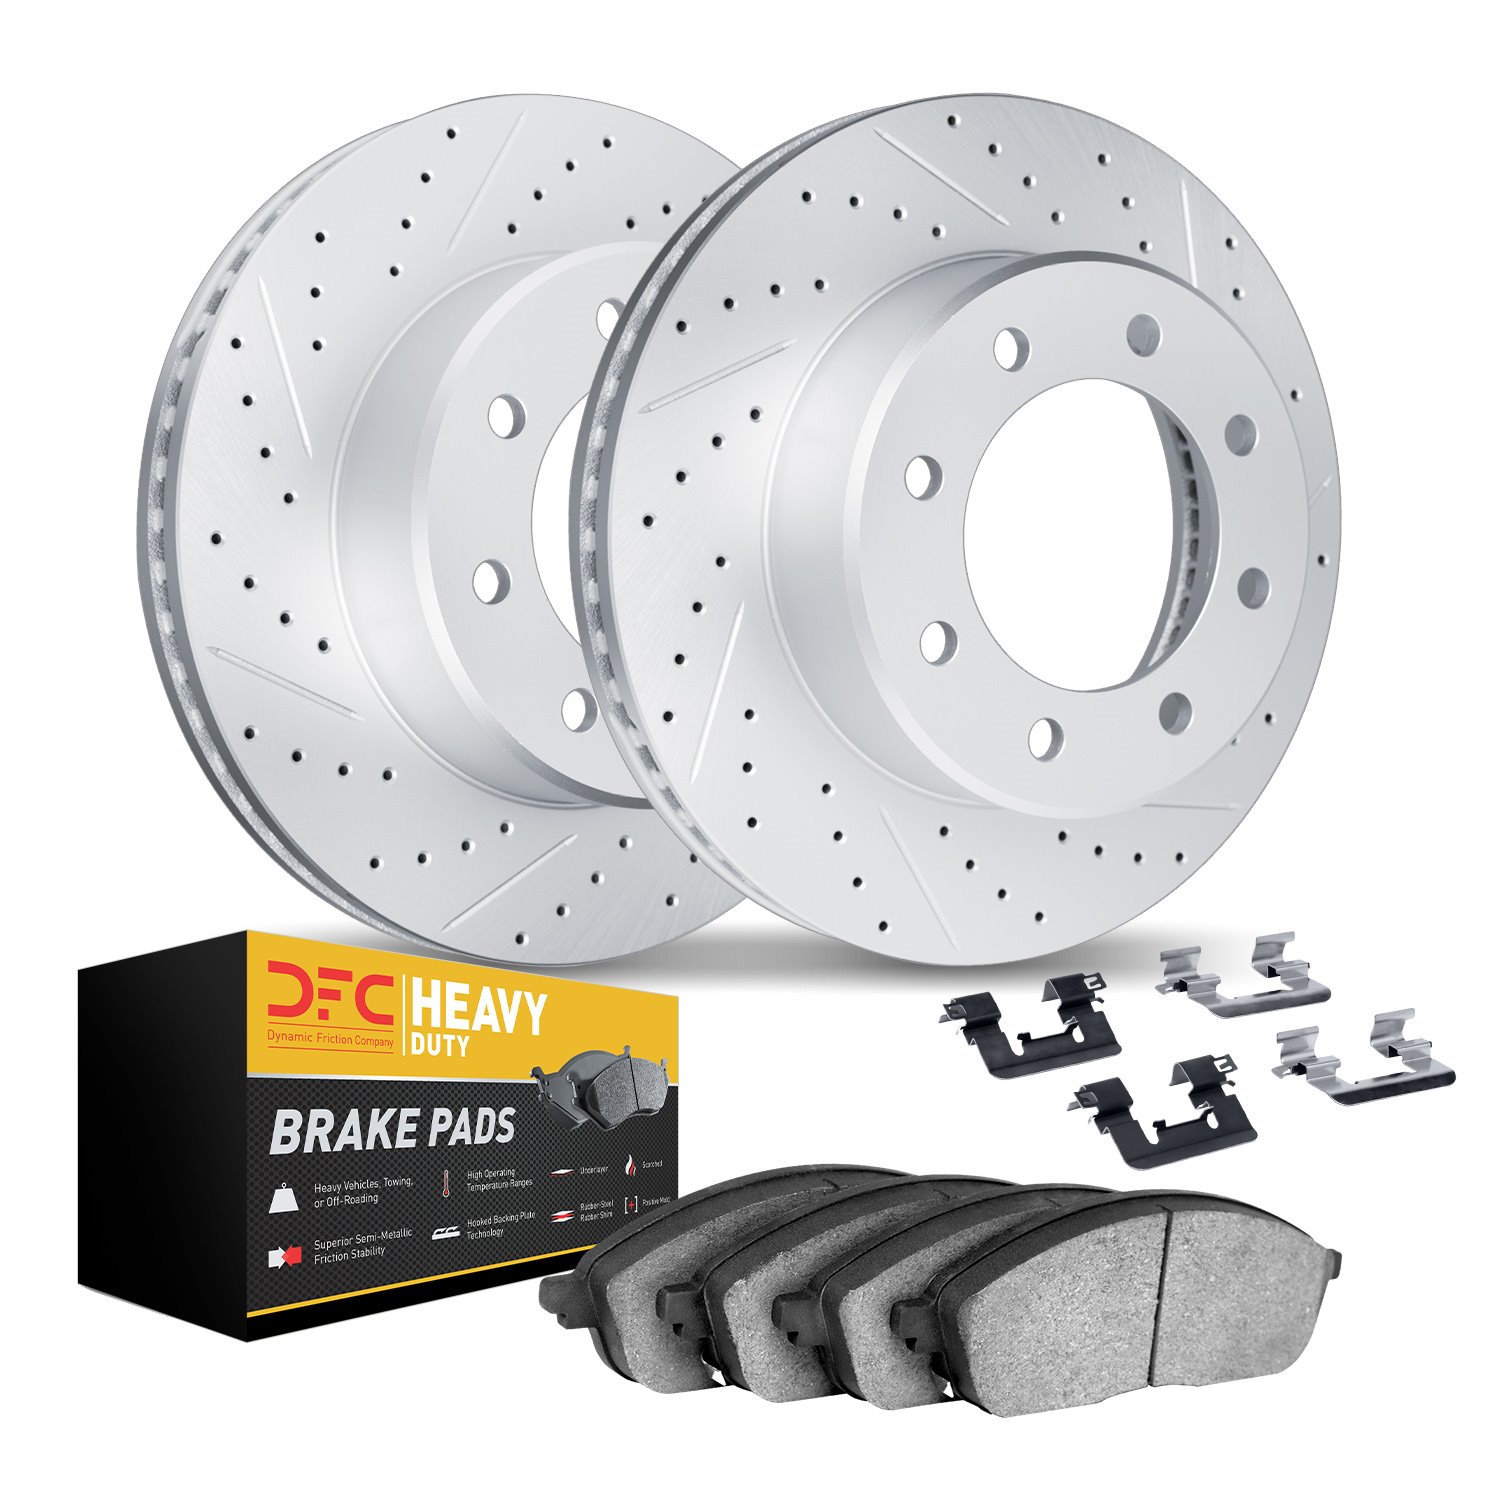 2212-99158 Geoperformance Drilled/Slotted Rotors w/Heavy-Duty Pads Kit & Hardware, 2010-2012 Ford/Lincoln/Mercury/Mazda, Positio